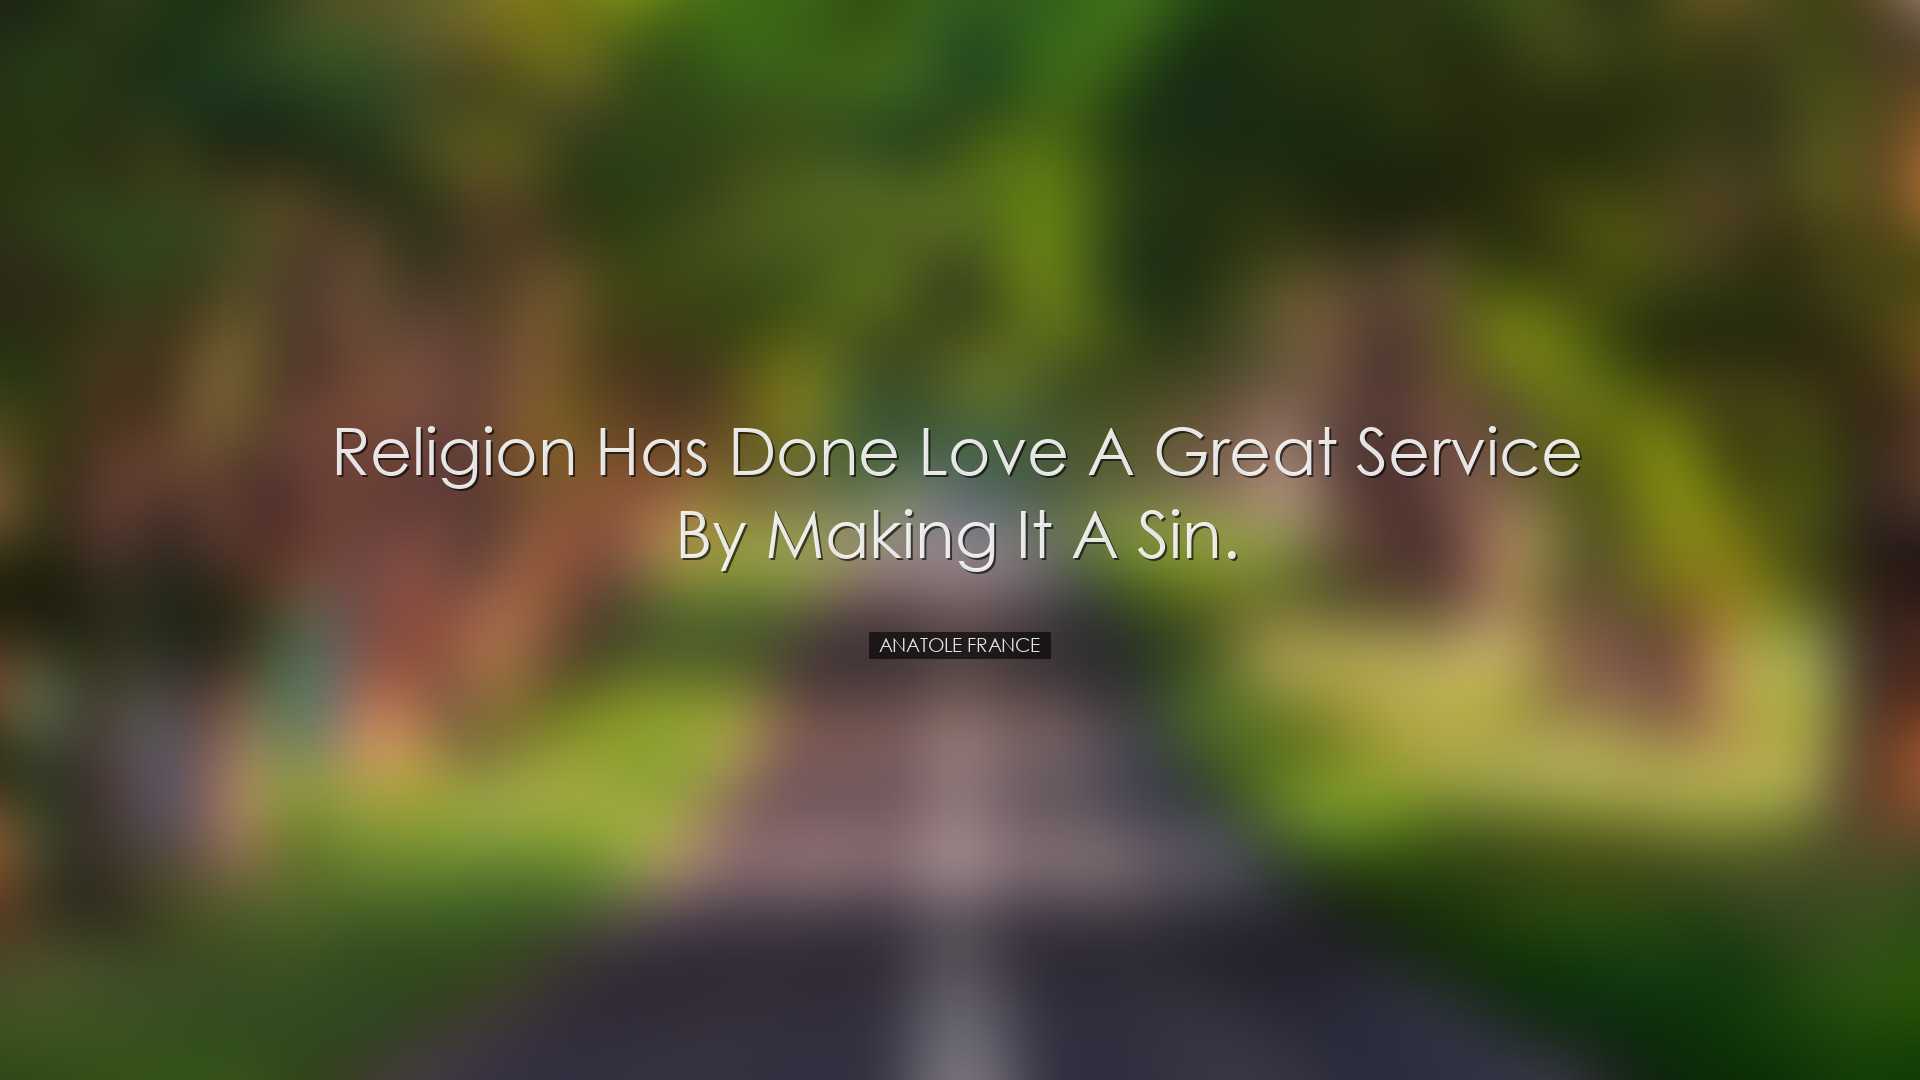 Religion has done love a great service by making it a sin. - Anato